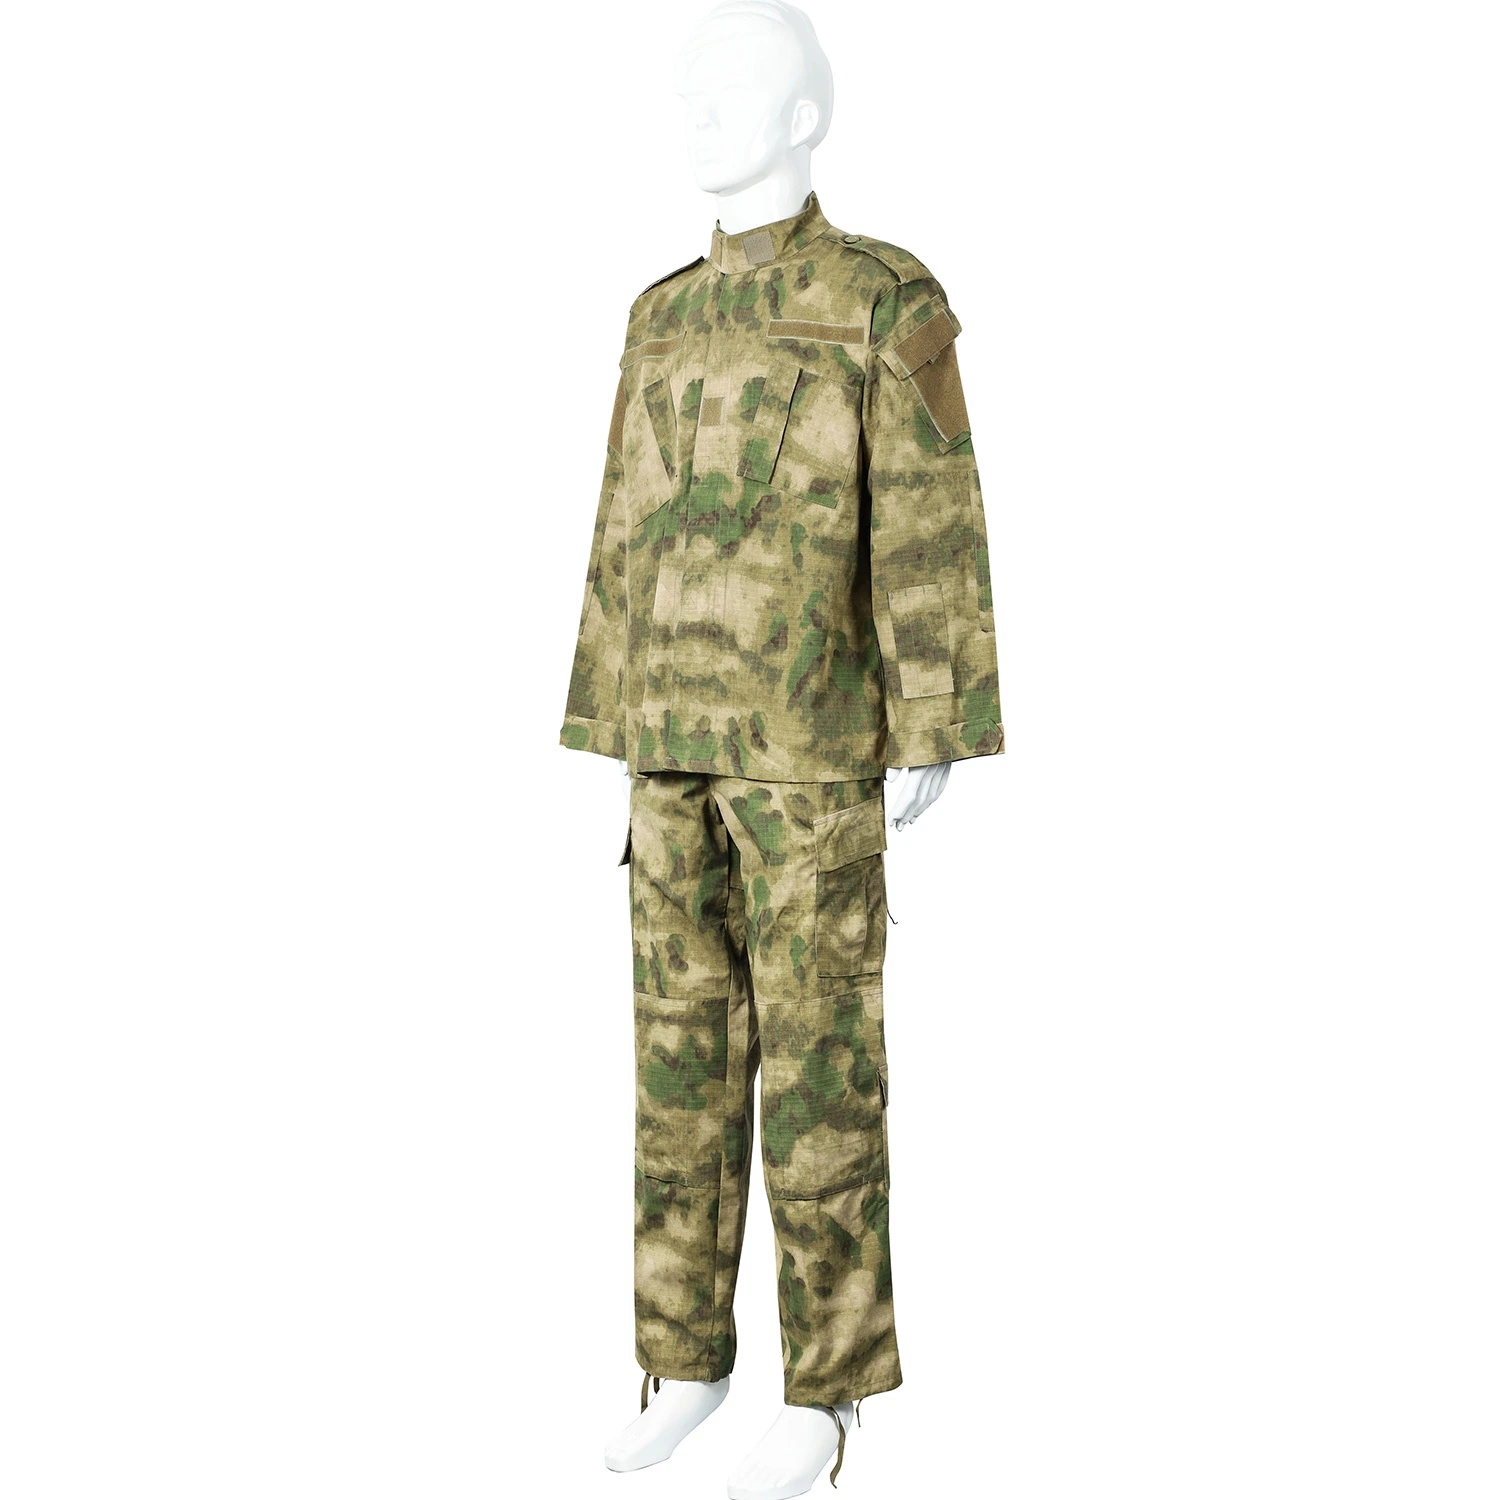 Outdoor Military Style Combat Uniforms Used Clothing Cheap Army Style Uniform